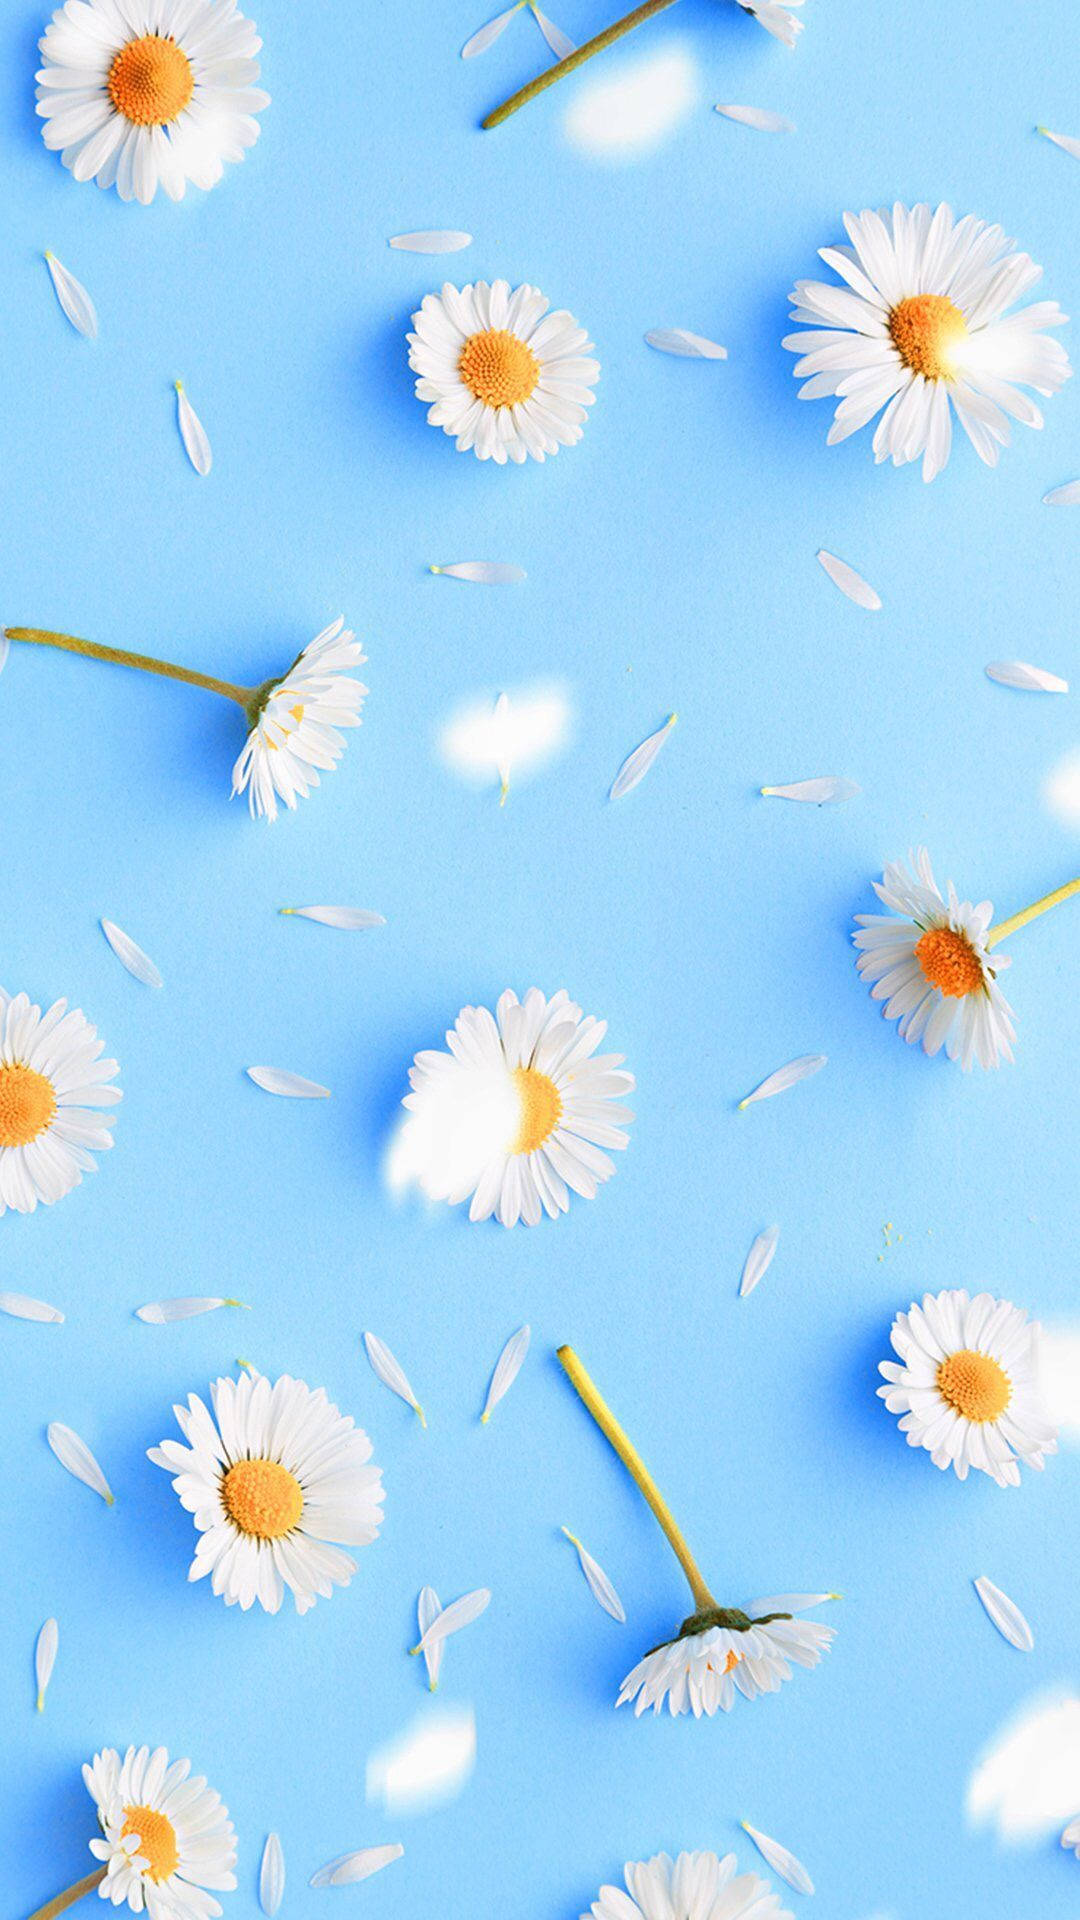 Daisy Iphone On Pastel Blue Surface